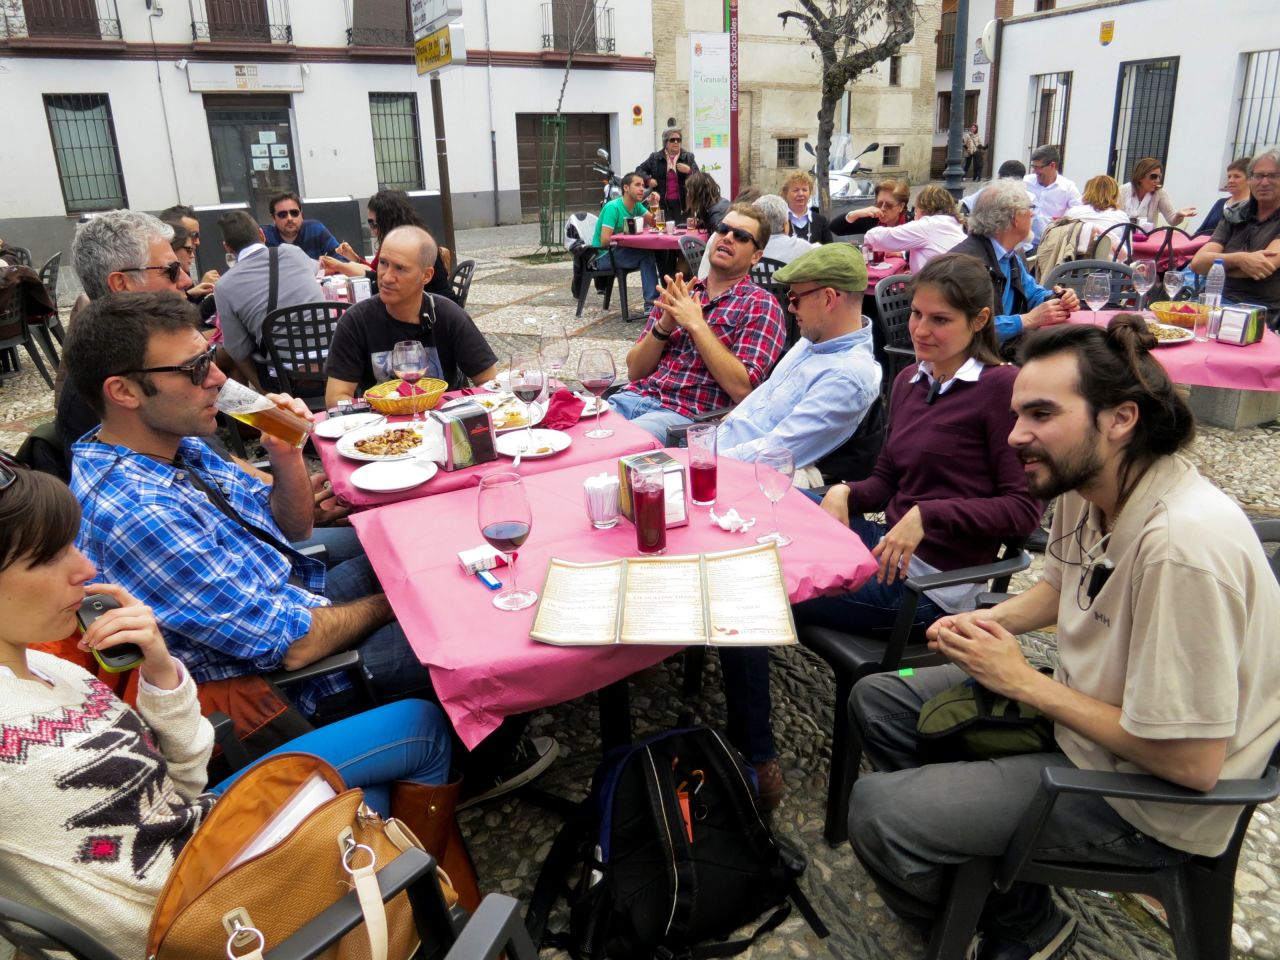 Crowds gather for tapas -- delicious small bites of food that are, in some areas of Spain, free if you keep ordering drinks.